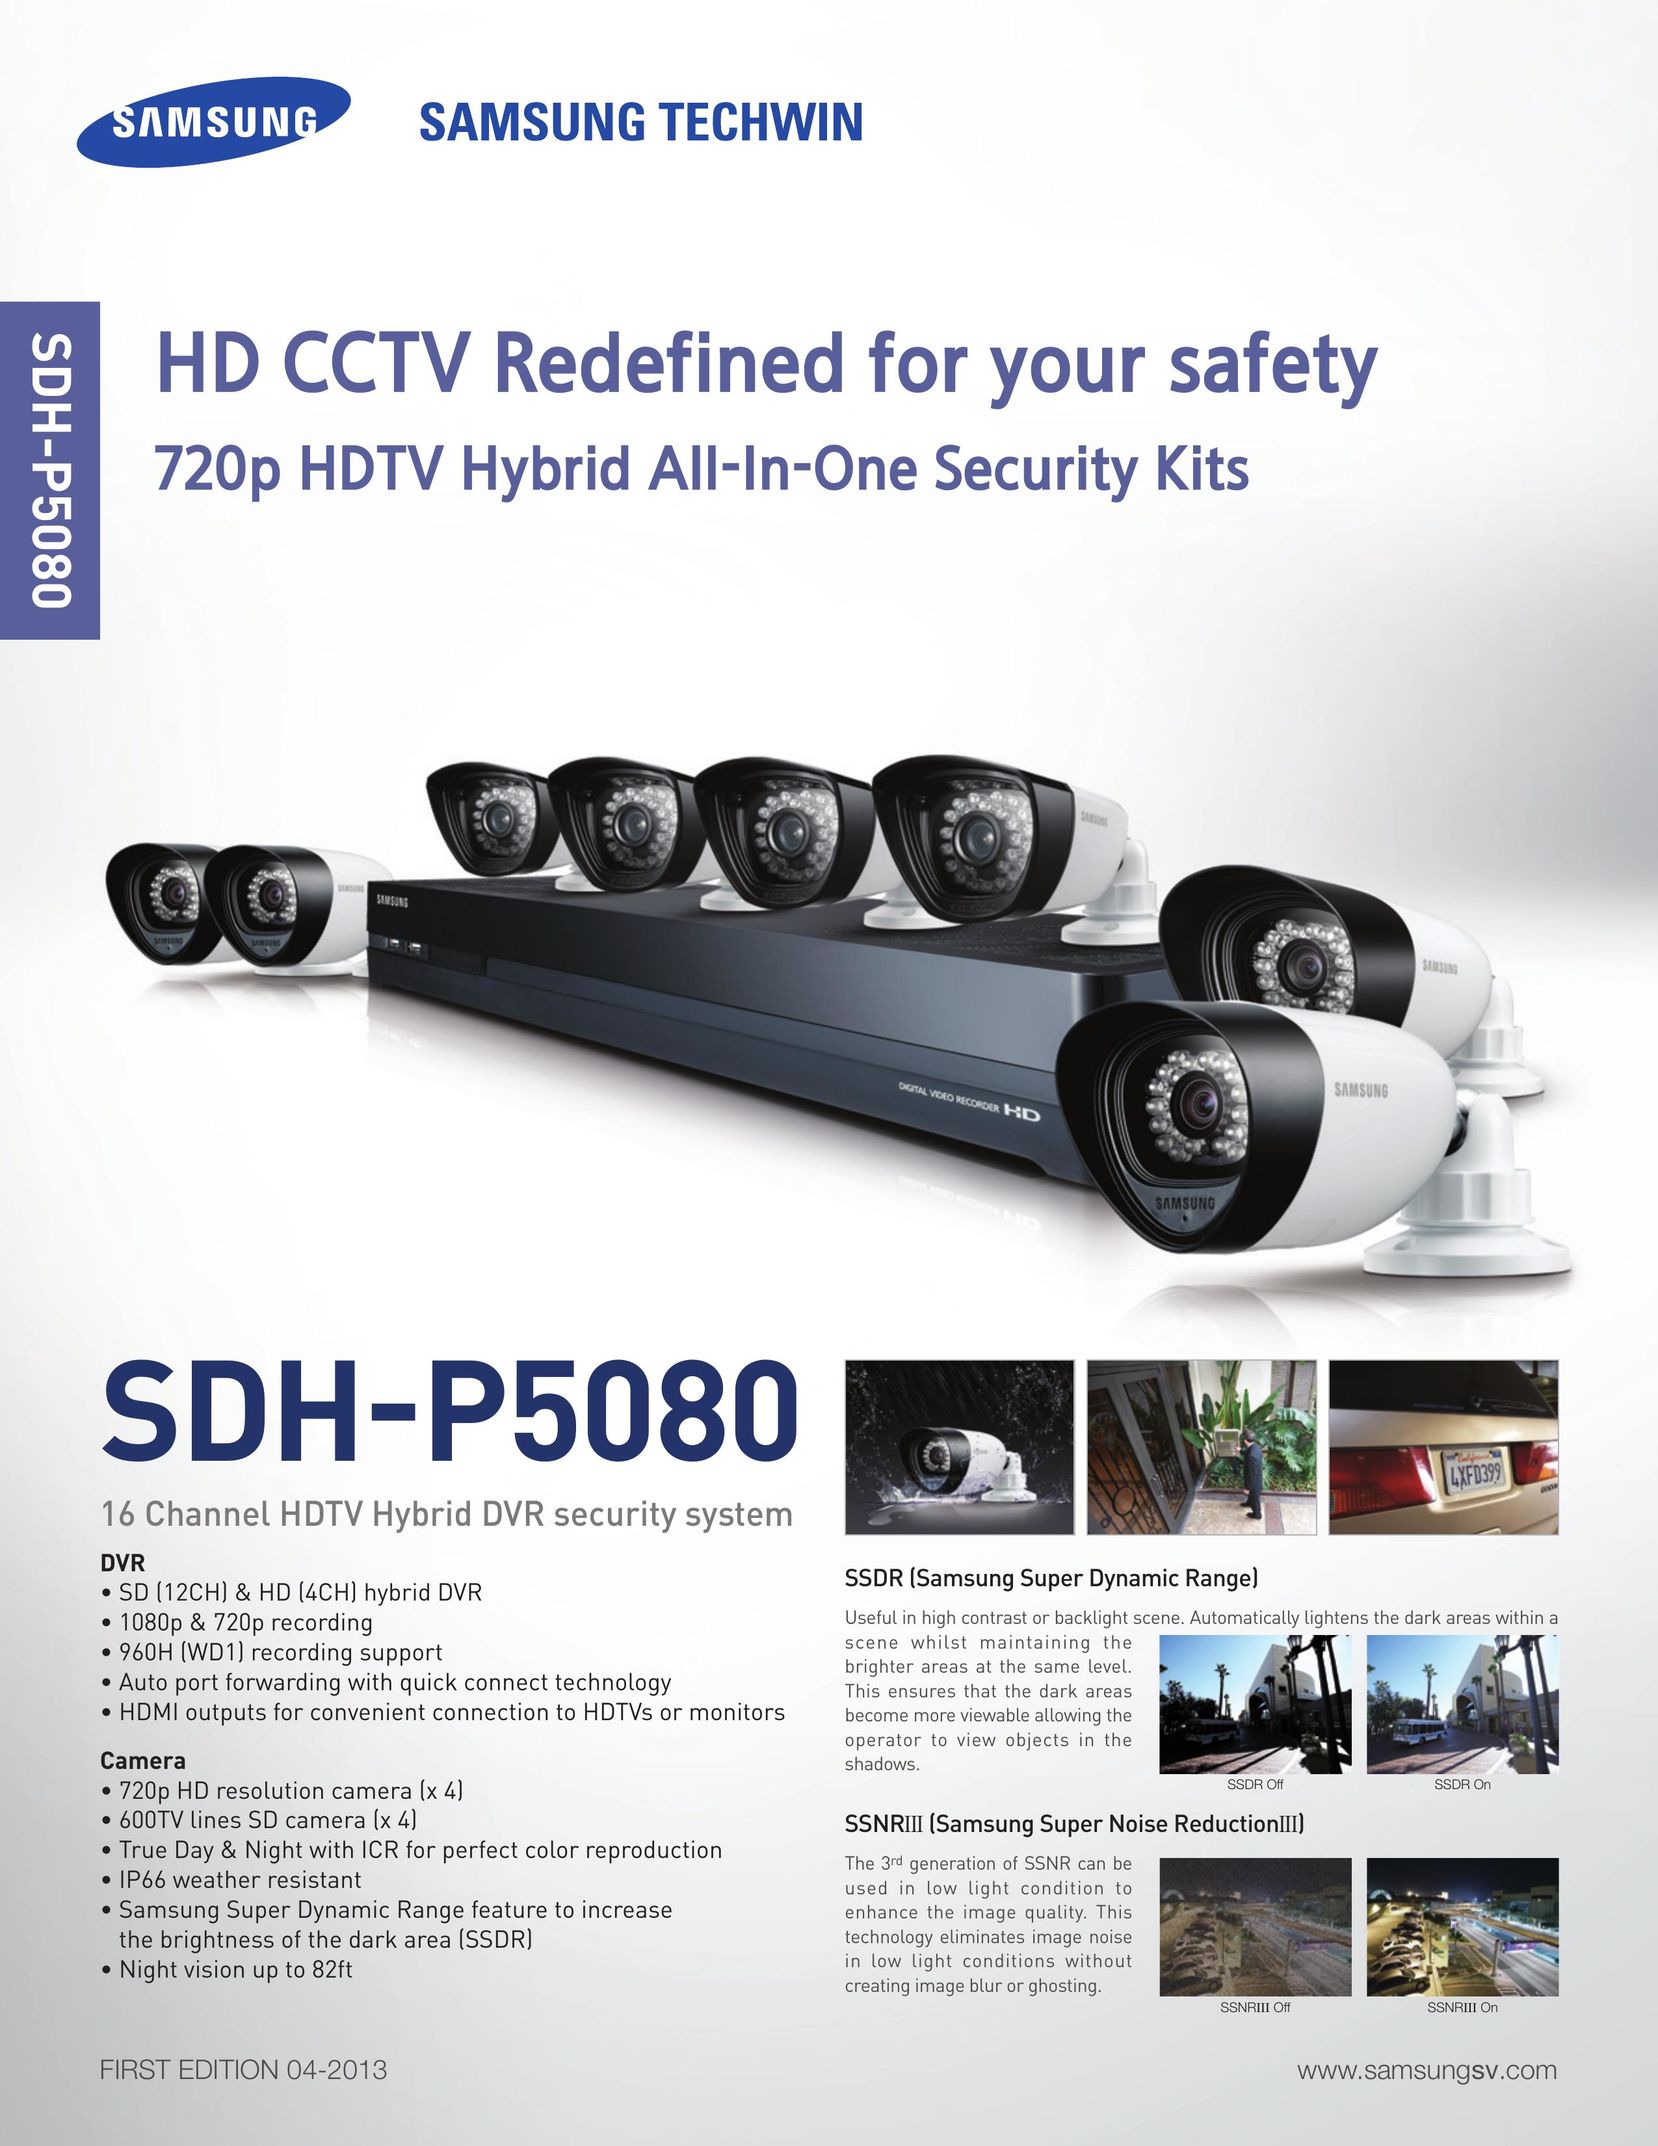 Samsung SDHP5080 Home Security System User Manual